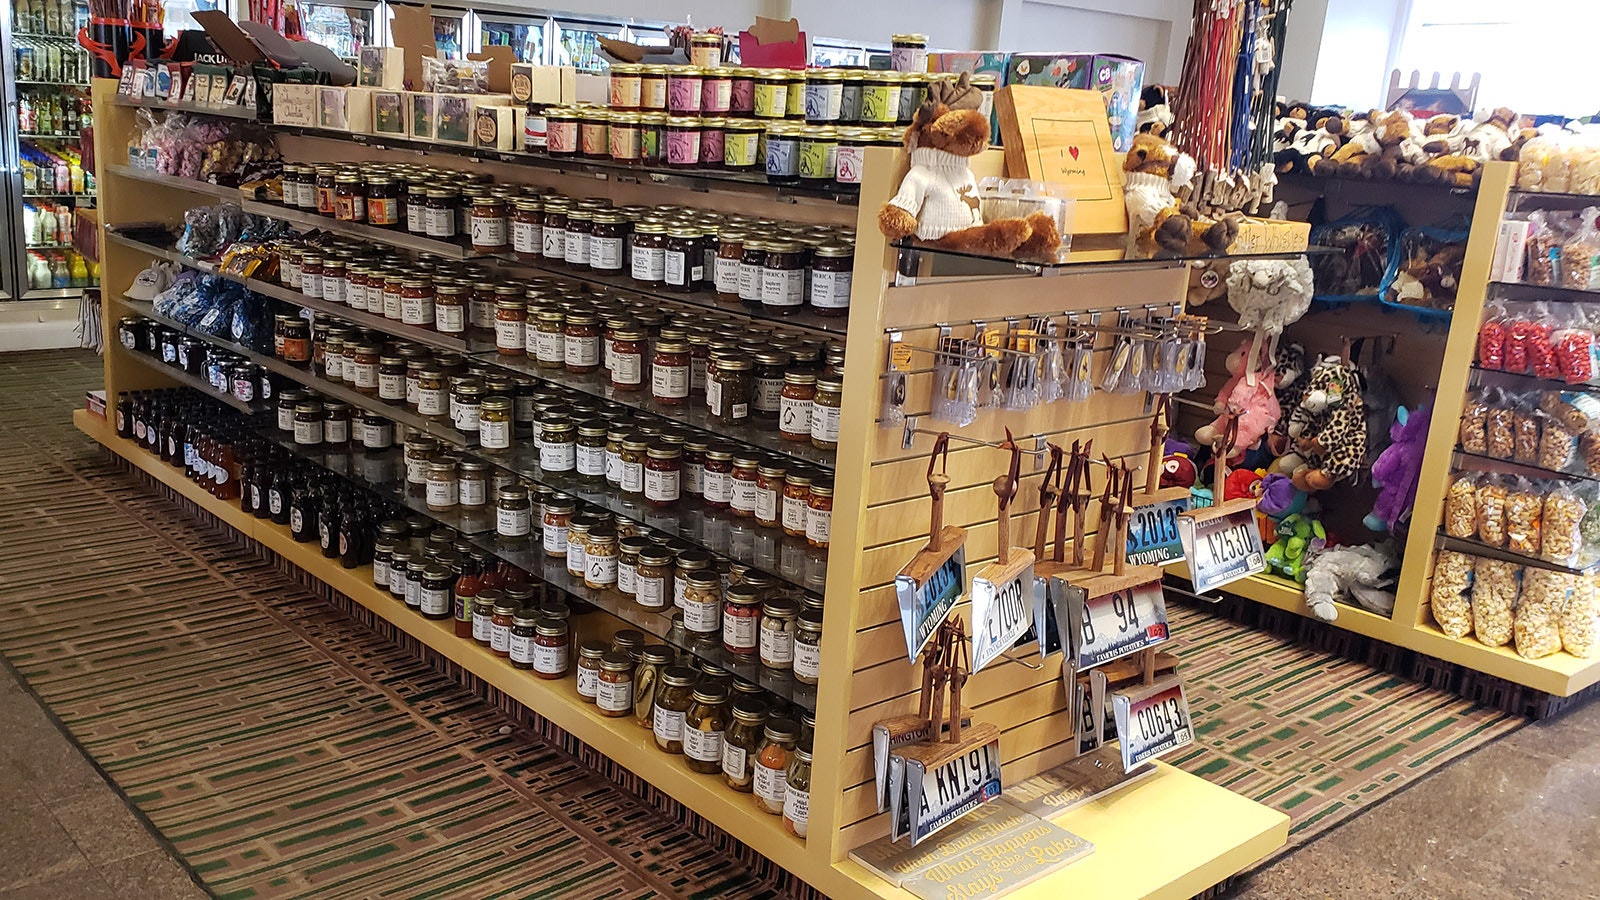 Little America offers its own brands of jams, jellies, pickles and other condiments inside its travel store.